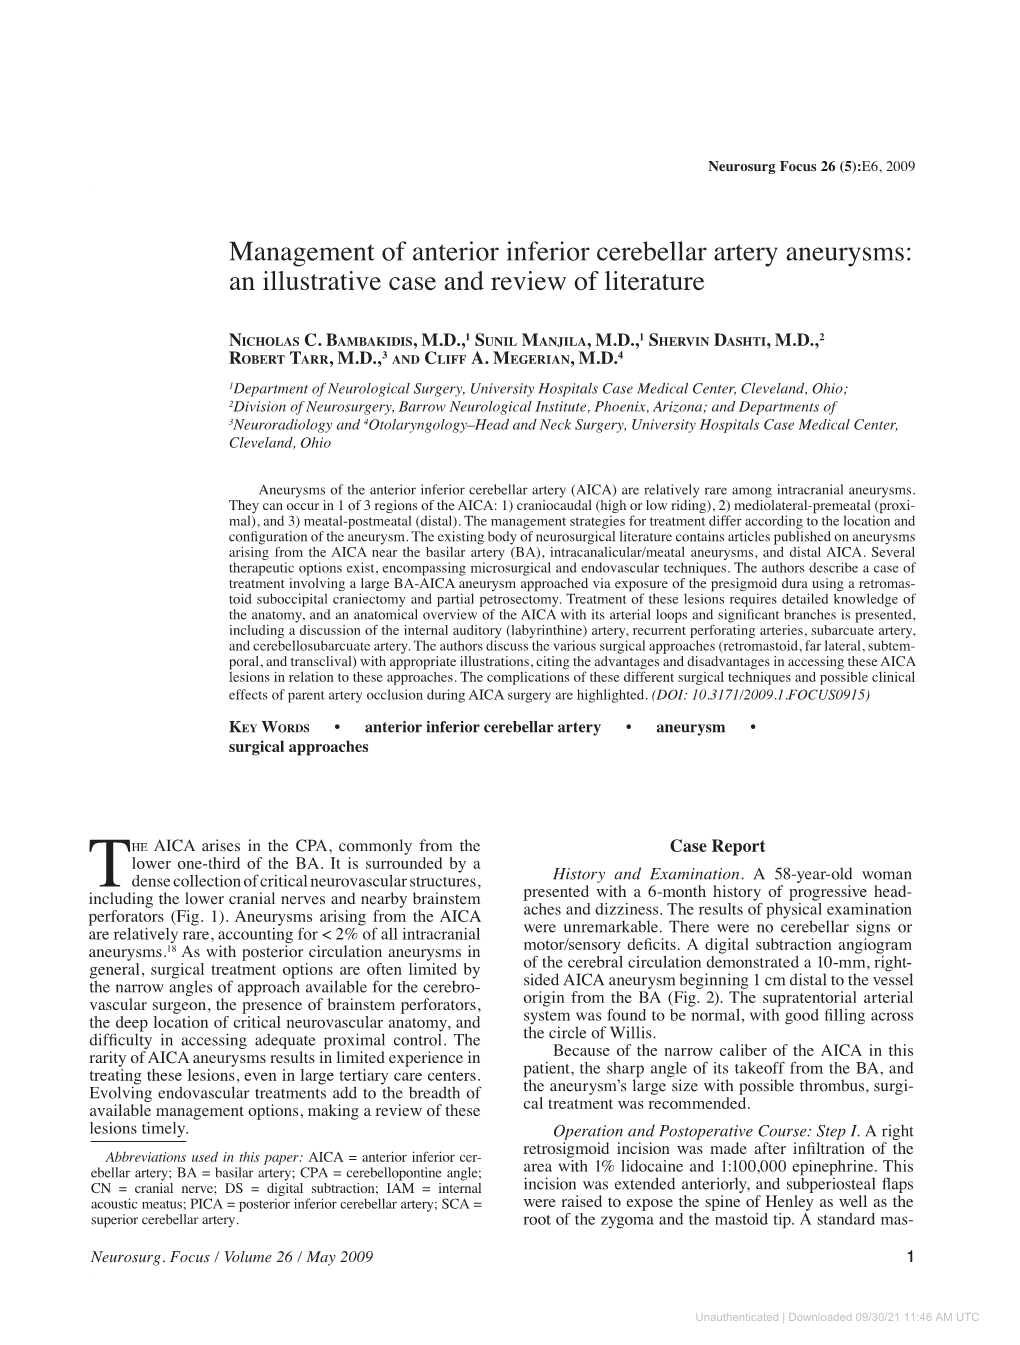 Management of Anterior Inferior Cerebellar Artery Aneurysms: an Illustrative Case and Review of Literature